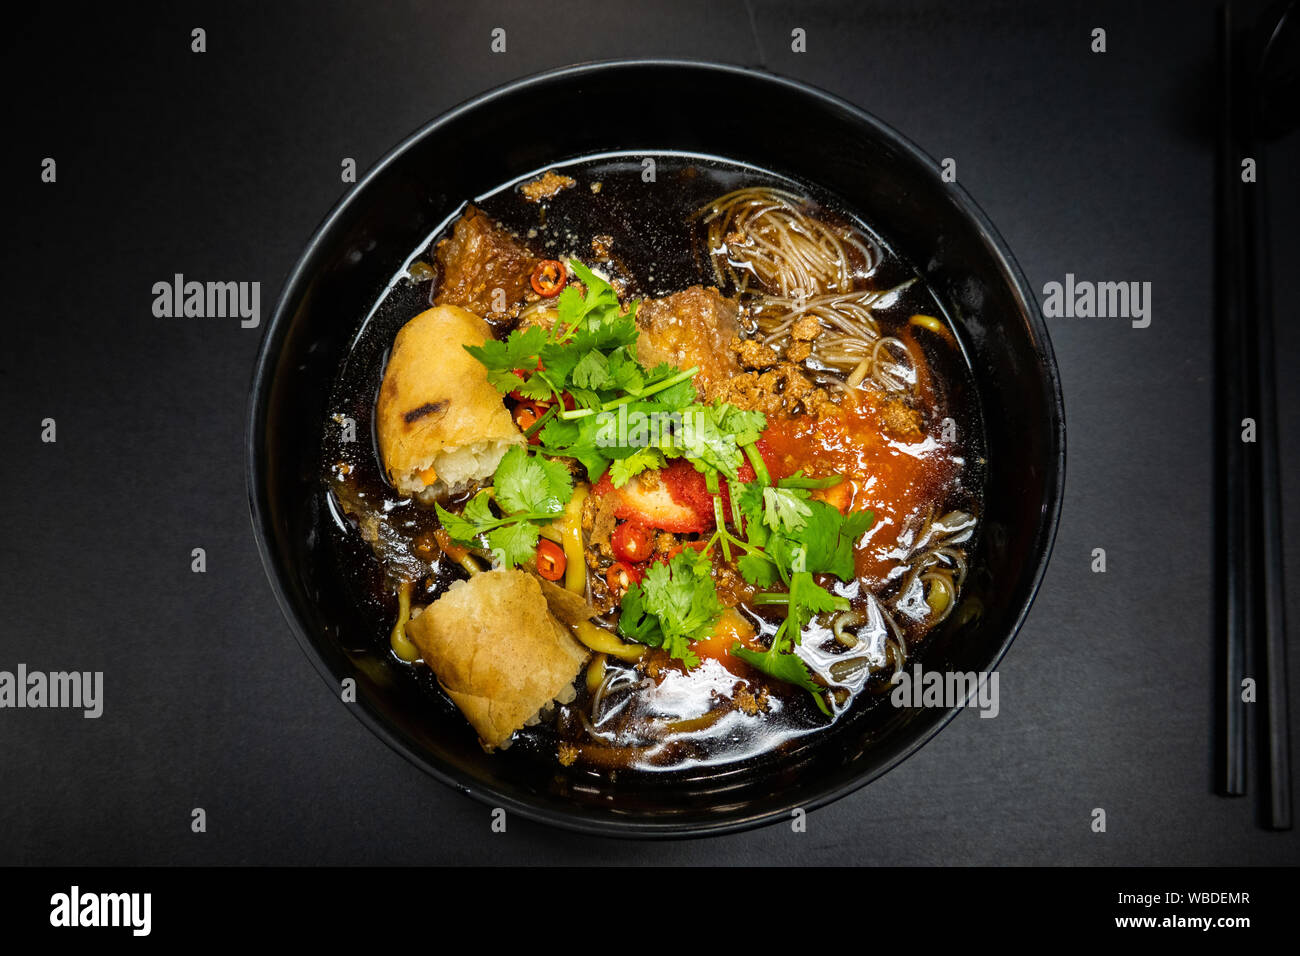 Lor Mee noodles soup - a vegan version of this famous Hokkien dish, served by a hawker stall in Singapore Stock Photo